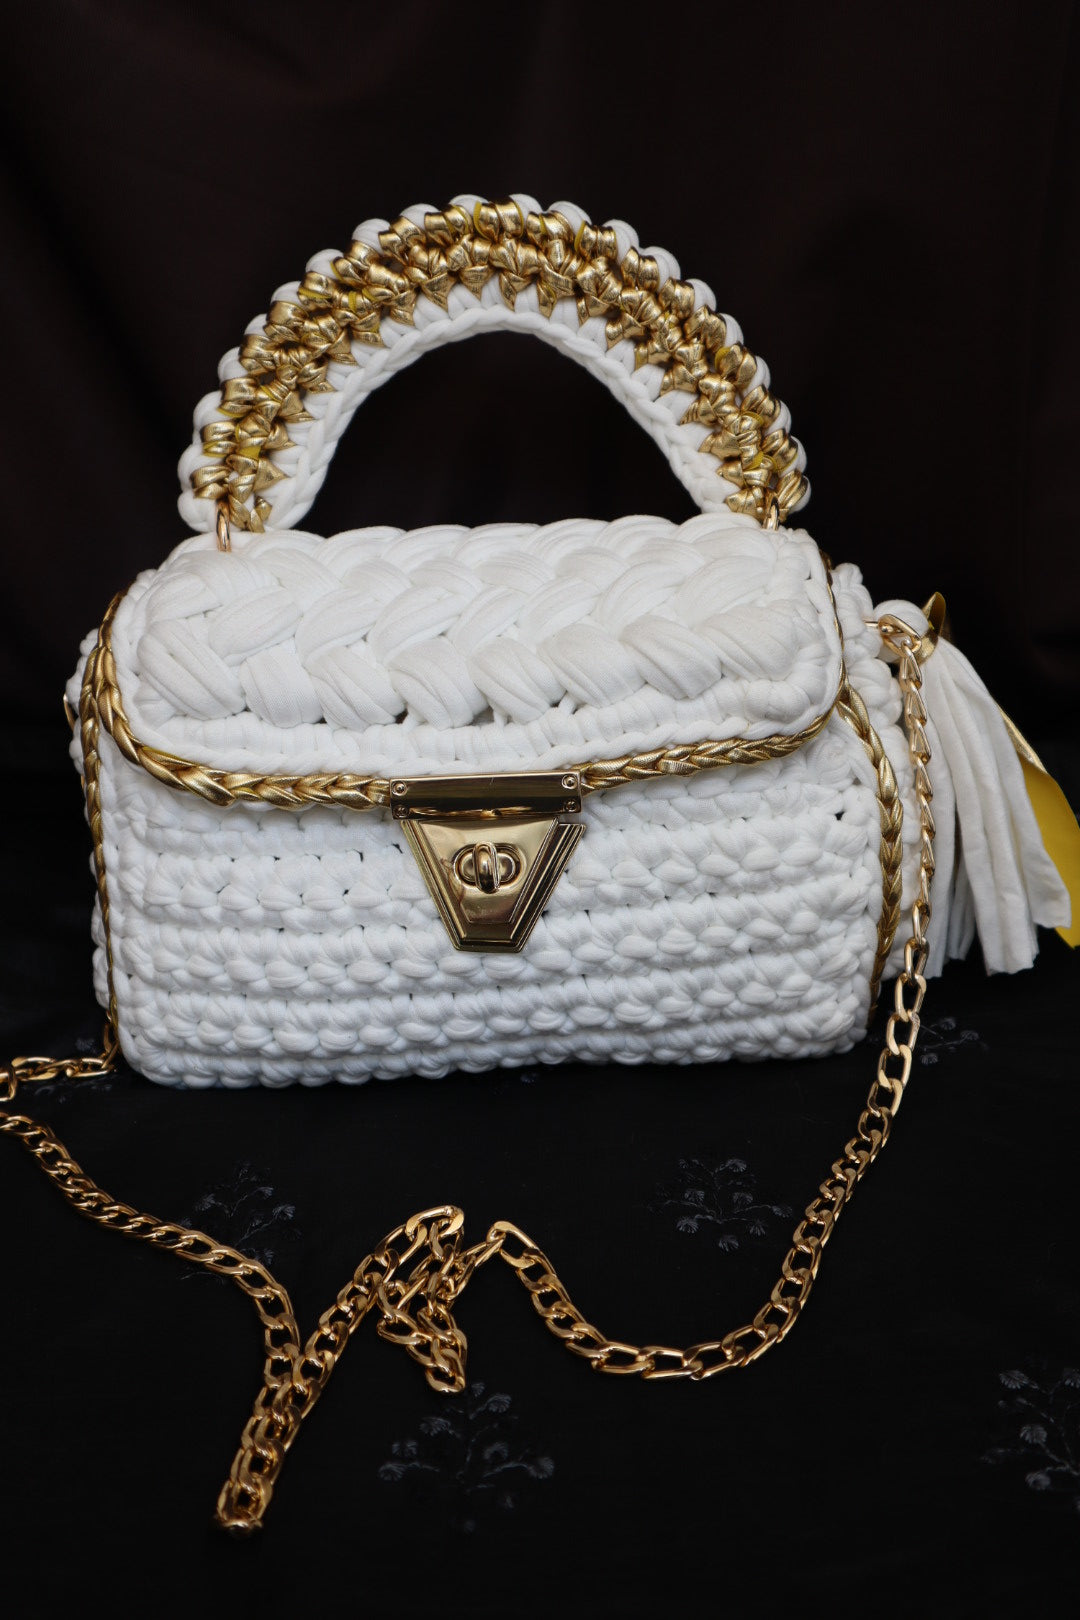 Elegant White and Gold Handcrafted Crochet Bag